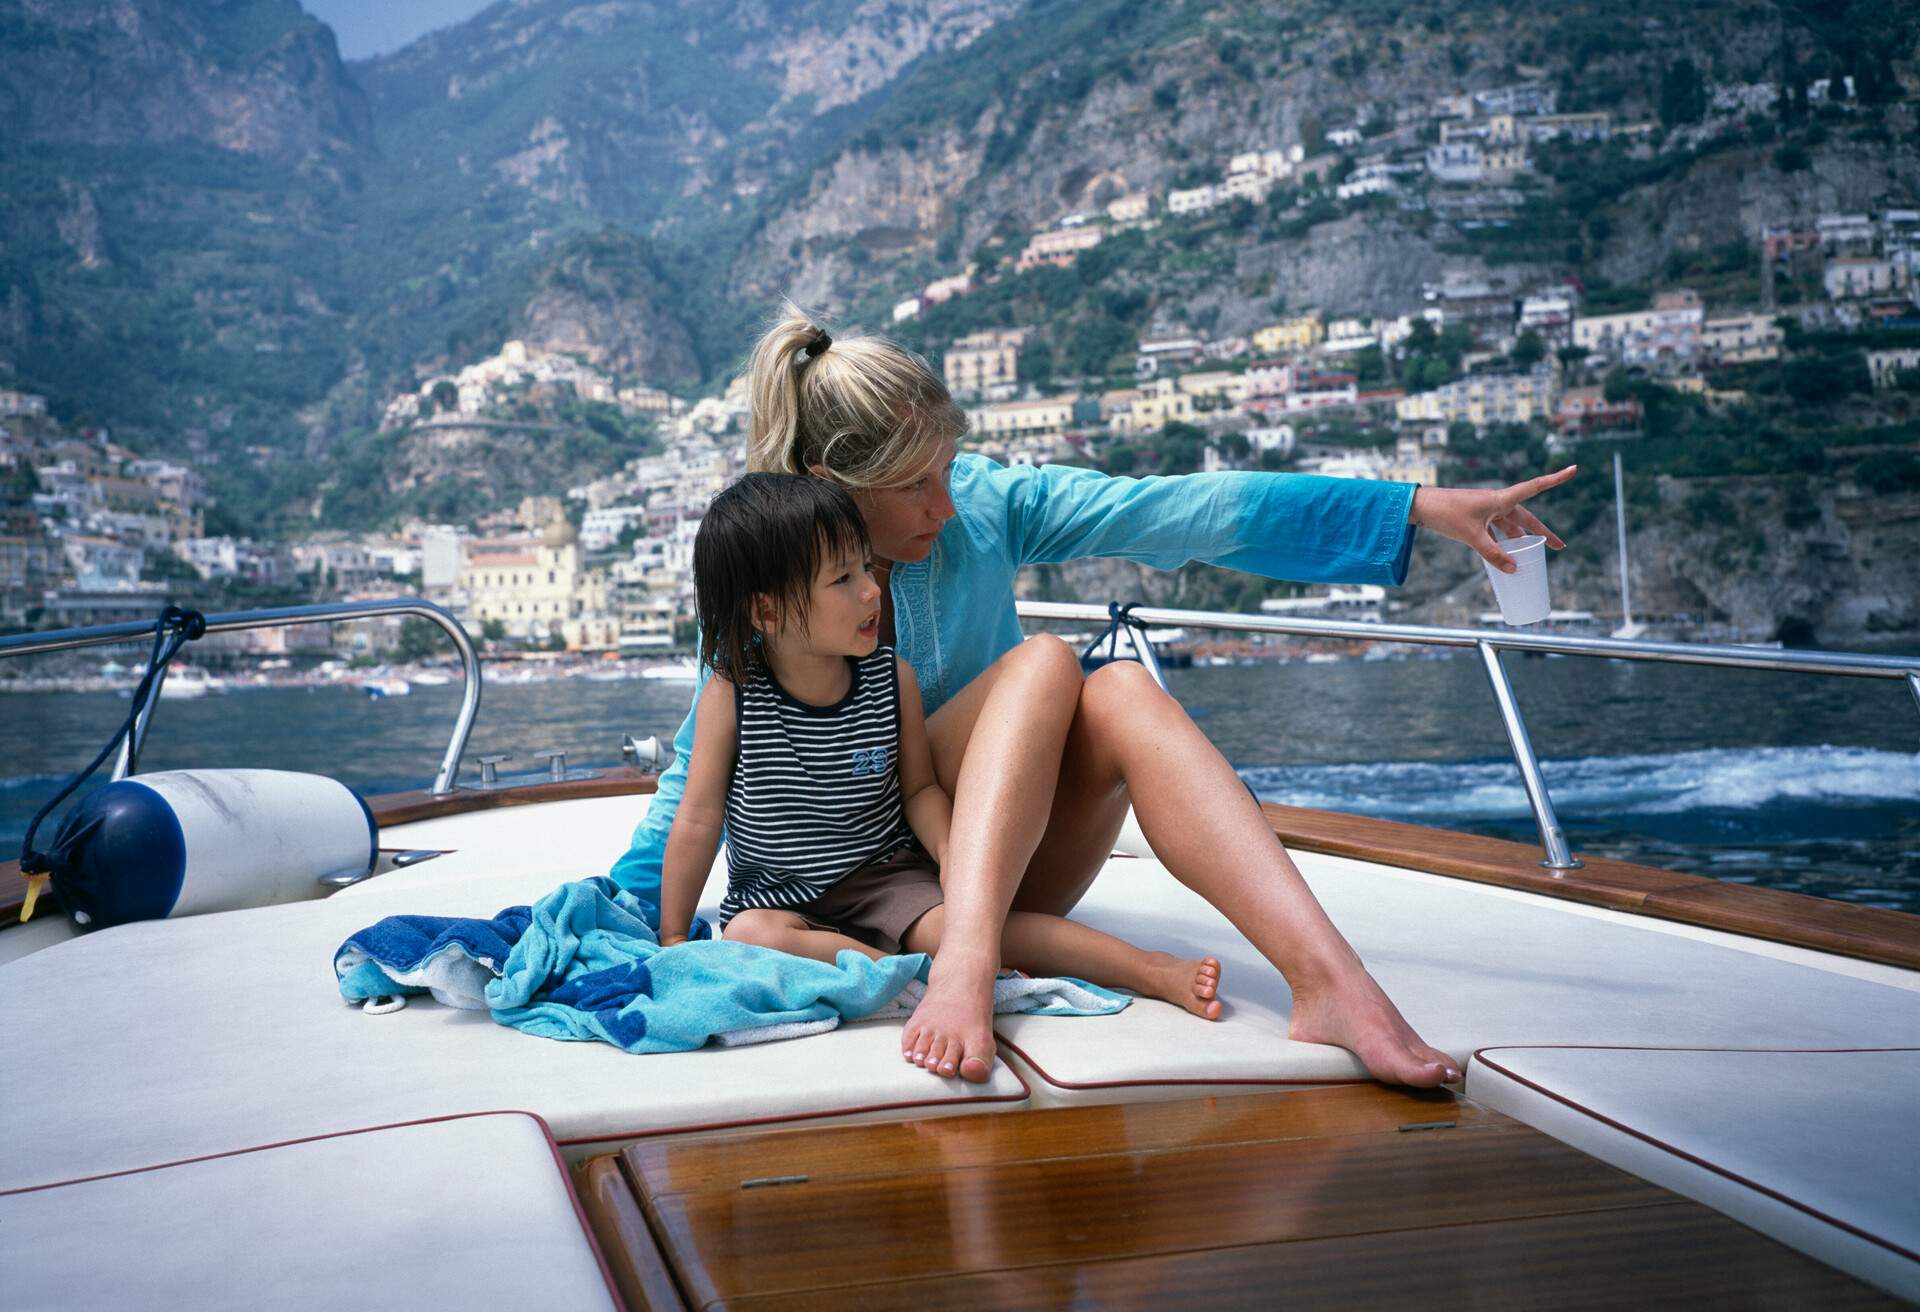 DEST_ITALY_AMALFI_COAST_THEME_BOAT_FAMILY_GettyImages-78766791